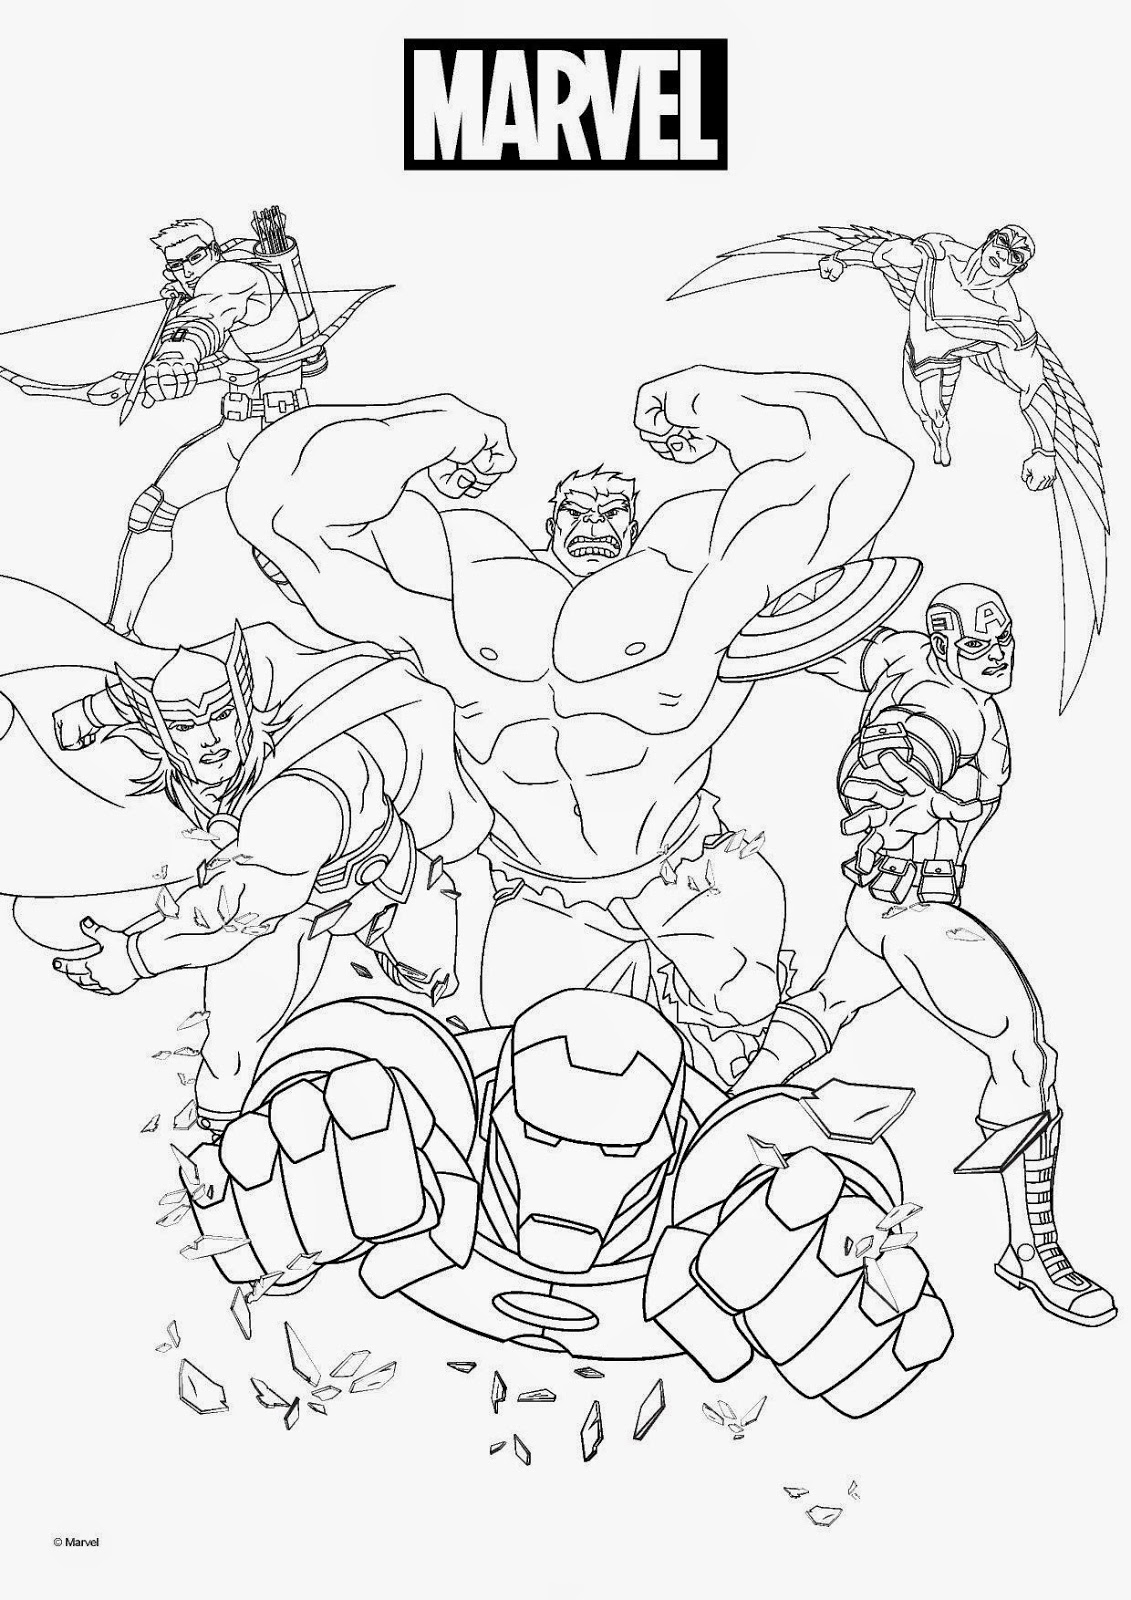 Marvel Superhero Coloring Pages Printable Coloring Pages